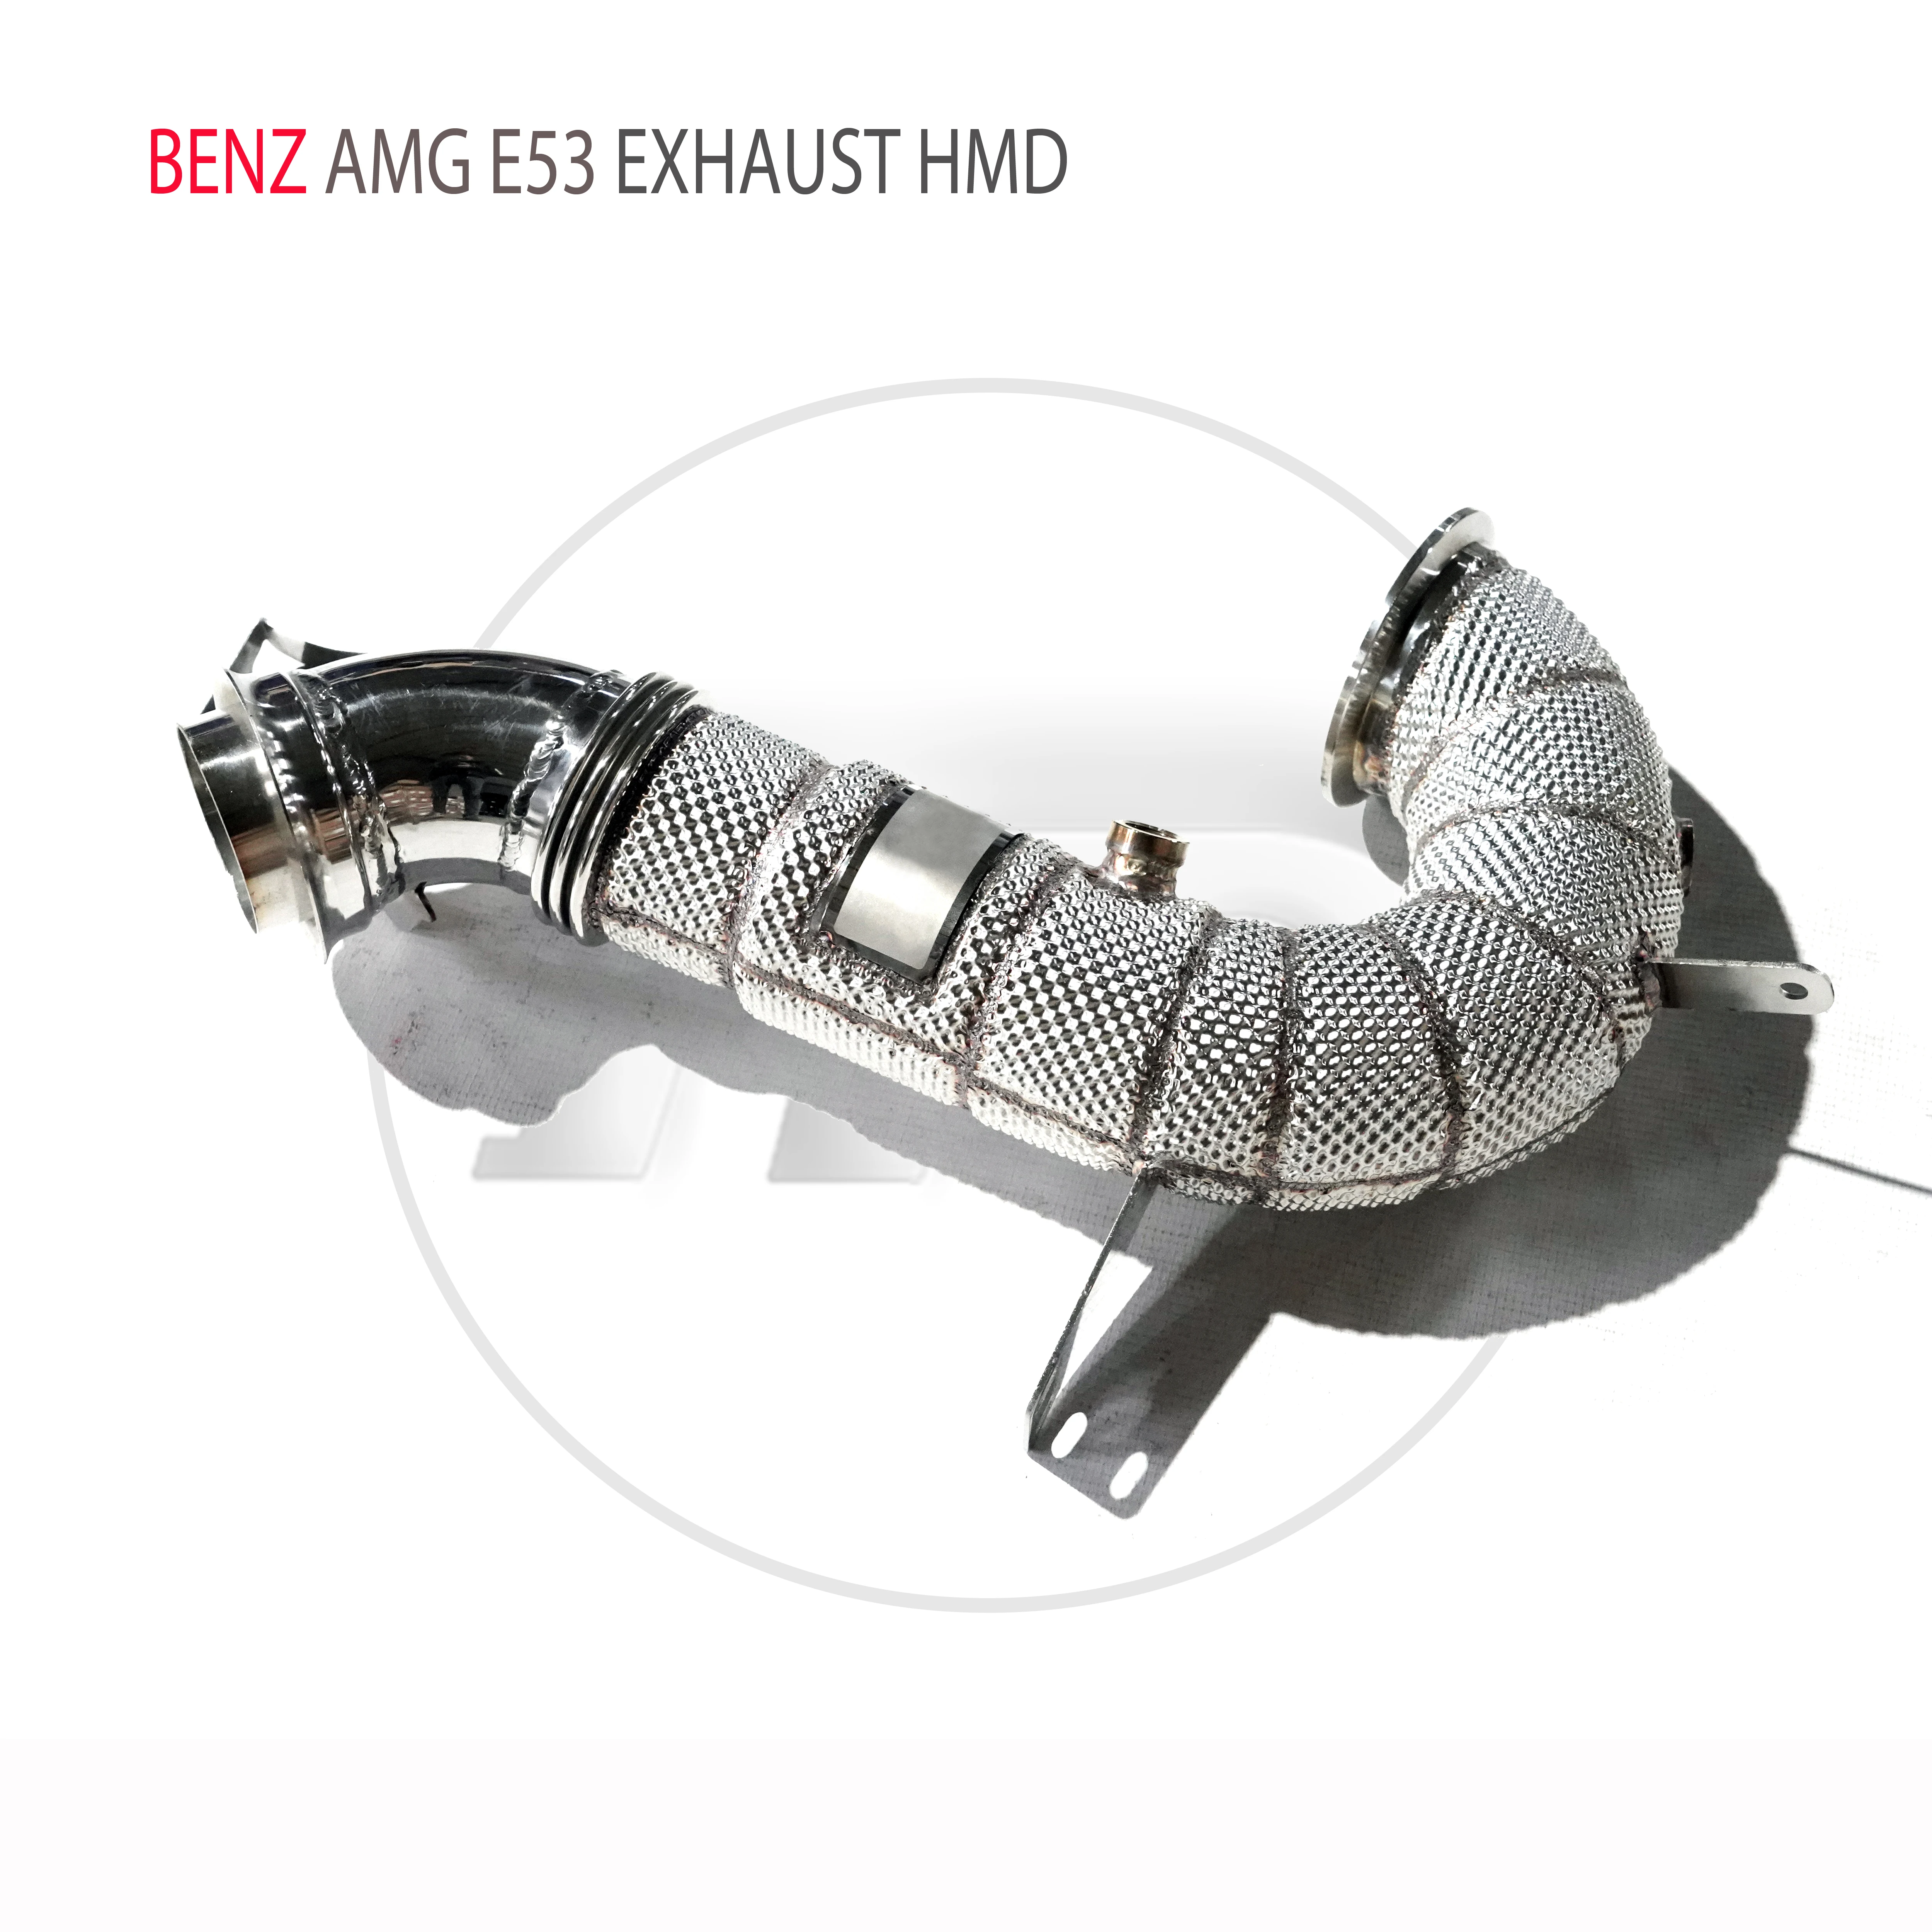 

HMD Exhaust Manifold Downpipe for BENZ AMG E53 Car Accessories Muffler With Catalytic Converter Header Without Cat Pipe